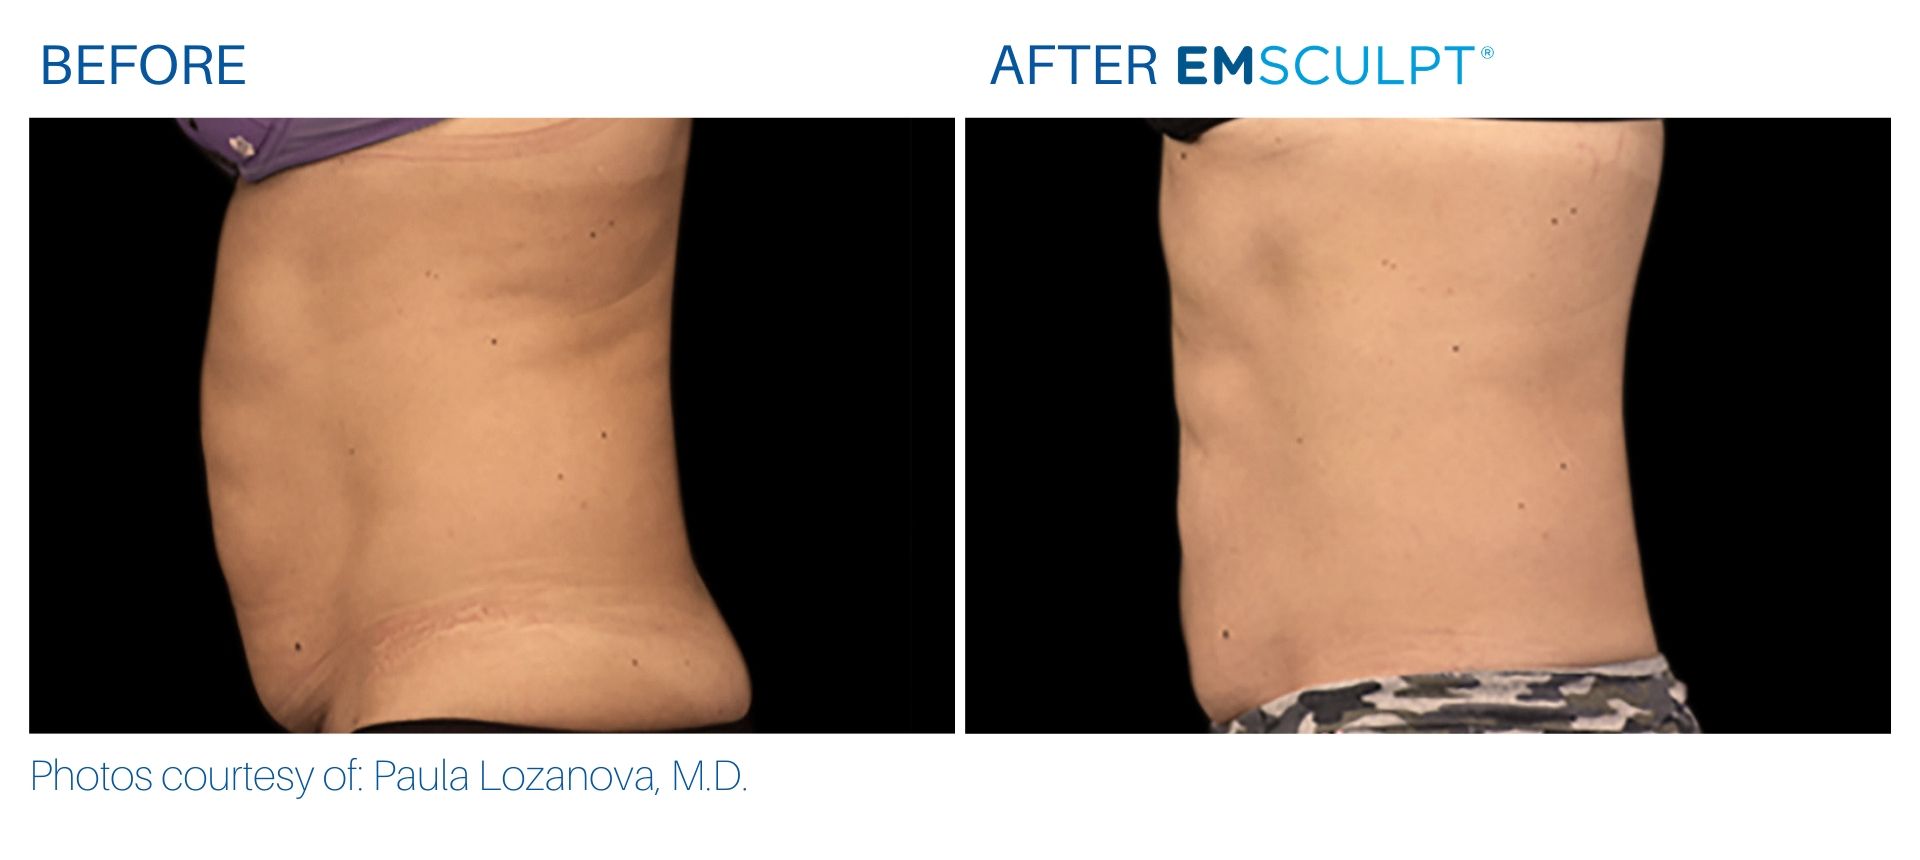 Emsculpt before and after Abdomen at Body Reflections in Somers, CT